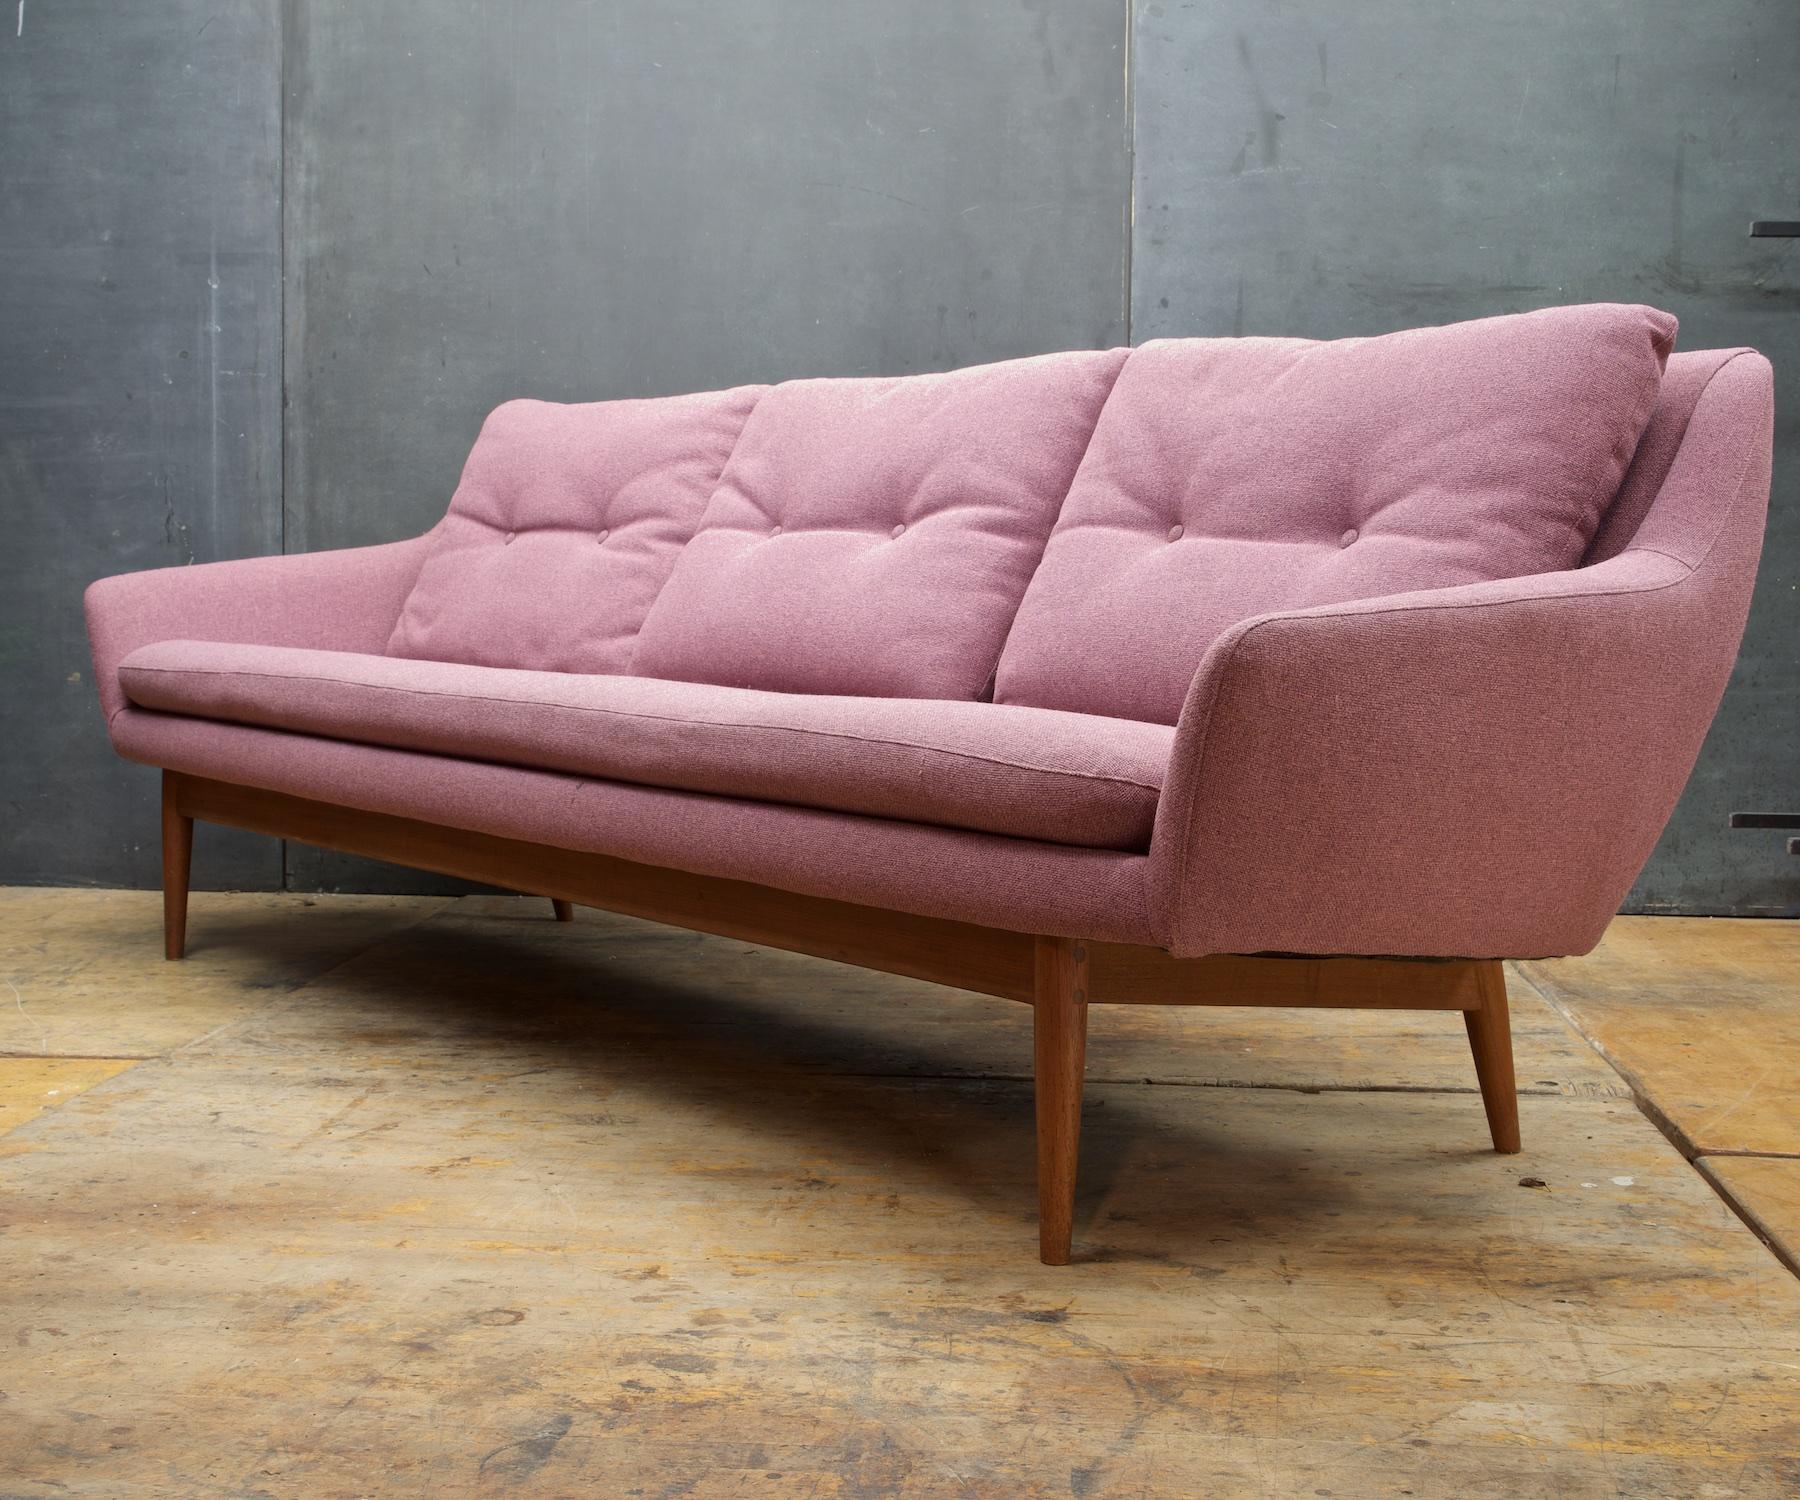 Wonderful architectural designed sofa by L.K. Hjelle of Norway. Solid teak legs and base. Showing some wear, reupholstery is 3 years old. Seat Height is about 16.5-17.5 and the arms are 22 high.

Last image shows the pink-mauve fabric color in